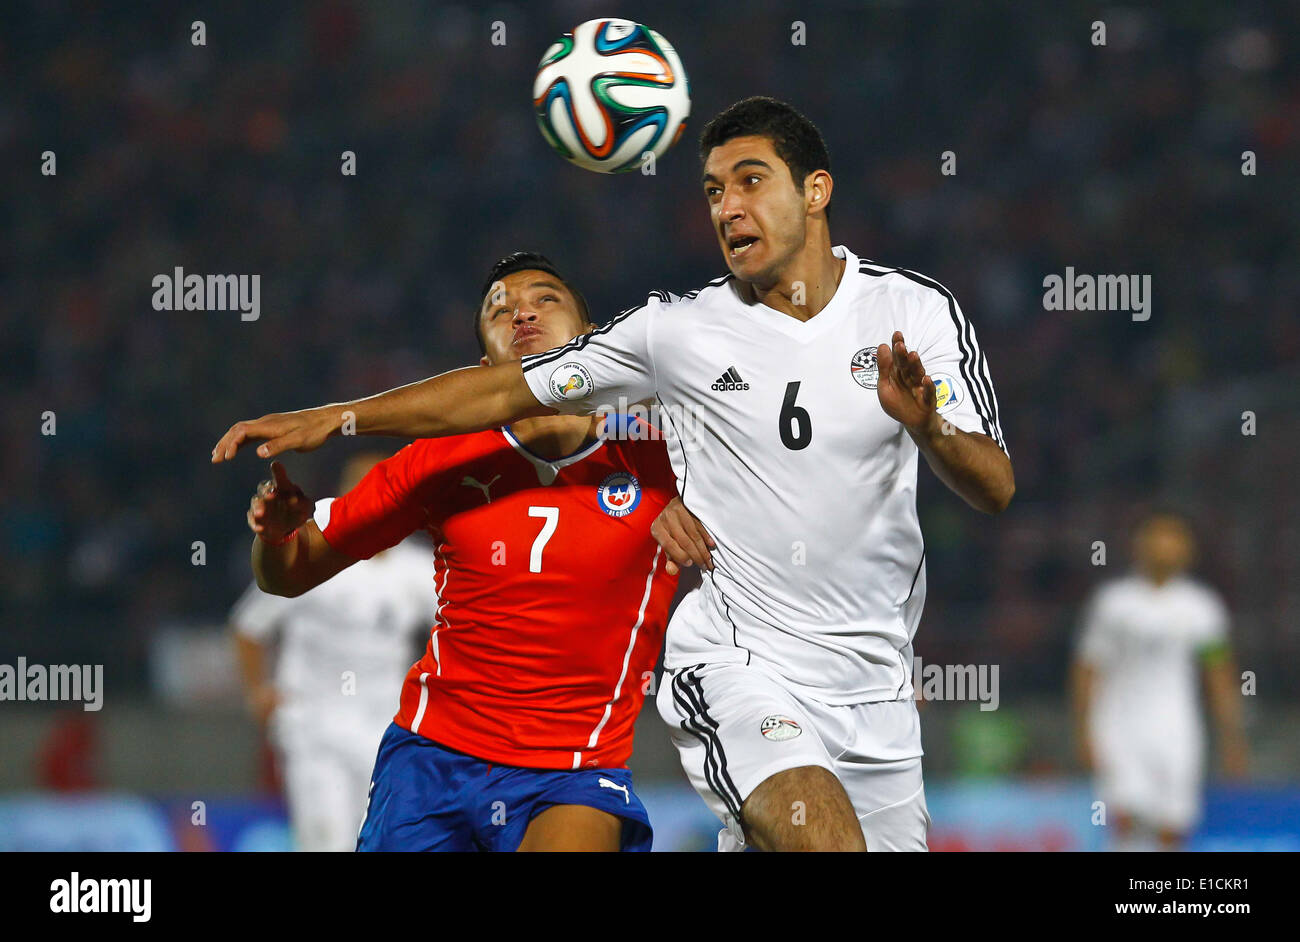 Santiago, Chile. 30th May, 2014. Alexis Sanchez (L) of Chile vies for the  ball with Rami Rabia of Egypt during their international friendly soccer  match in Santiago City, capital of Chile, on